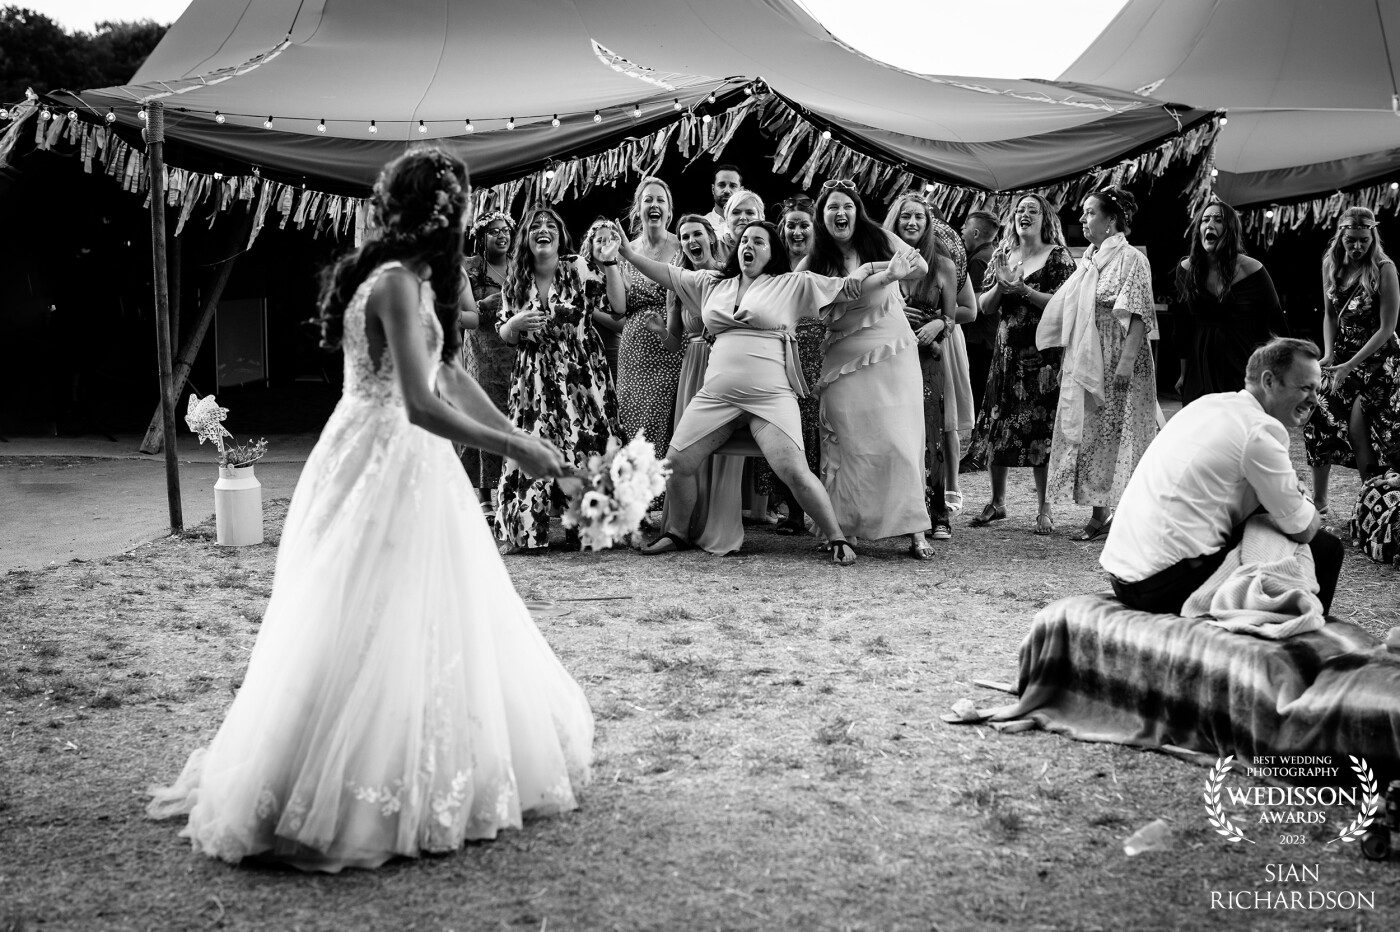 This photo will forever make me smile, the lady in the middle saw the bride was about to throw the bouquet and sprinted from the other side of the field jumping over straw bails to put herself in the centre and push everyone else back ready to catch the bouquet.